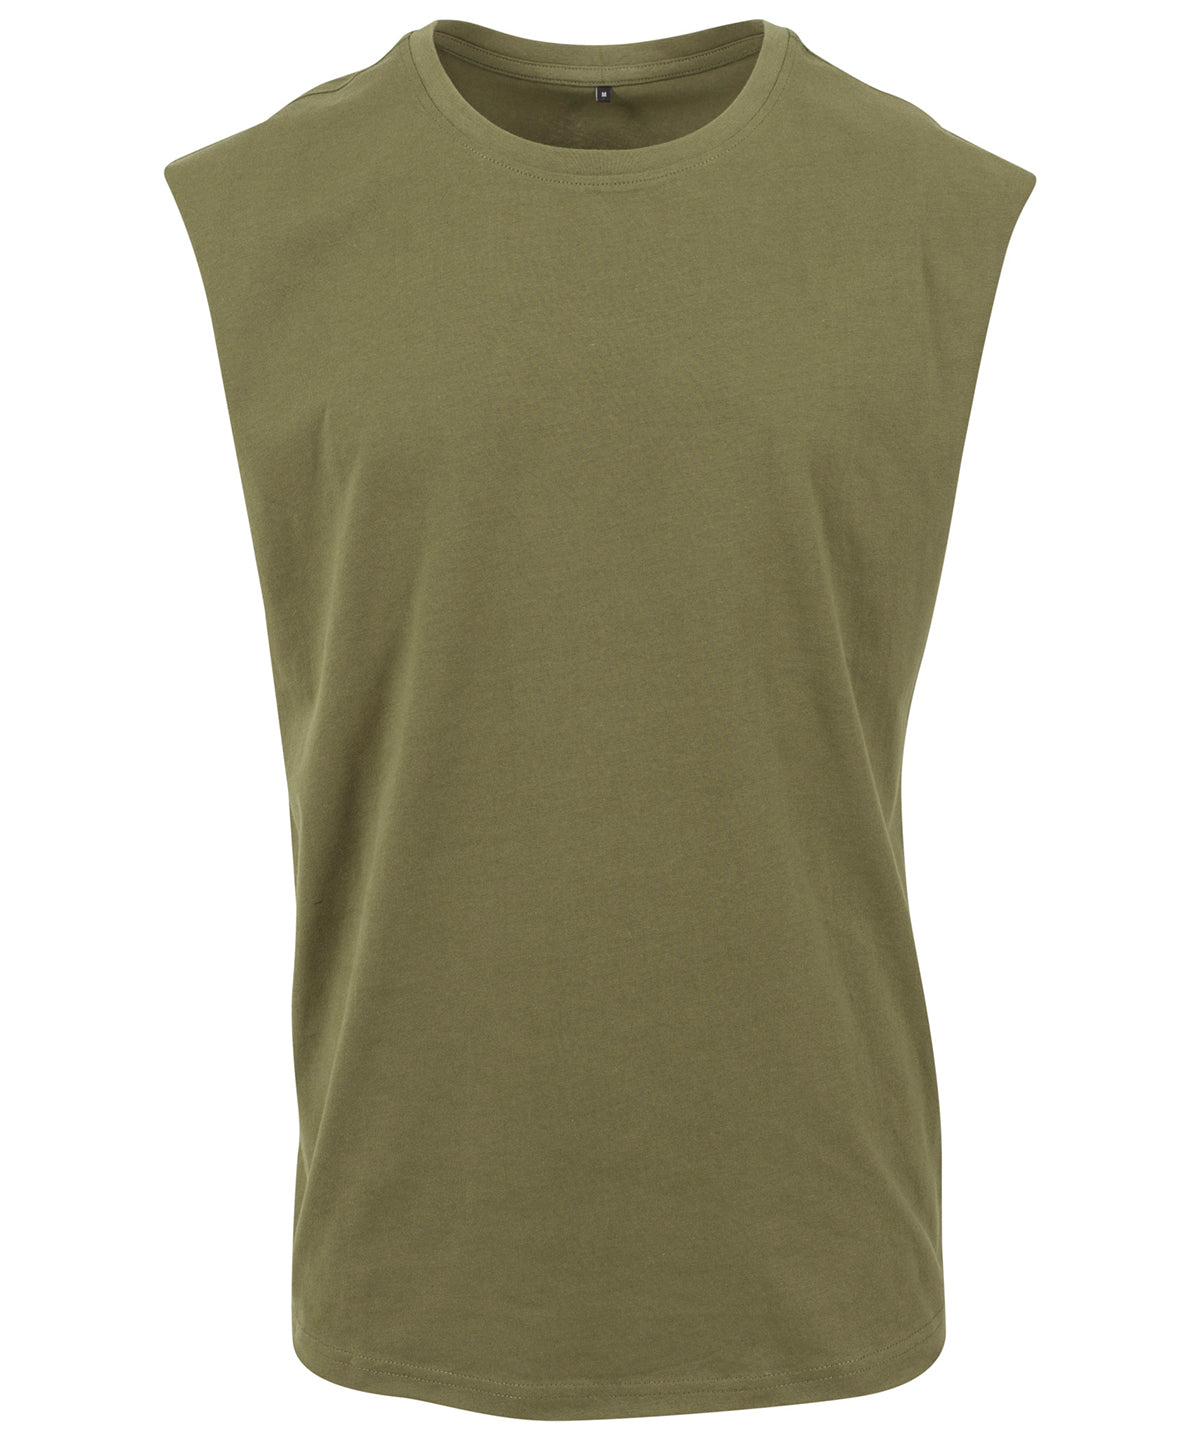 Personalised T-Shirts - Olive Build Your Brand Sleeveless tee